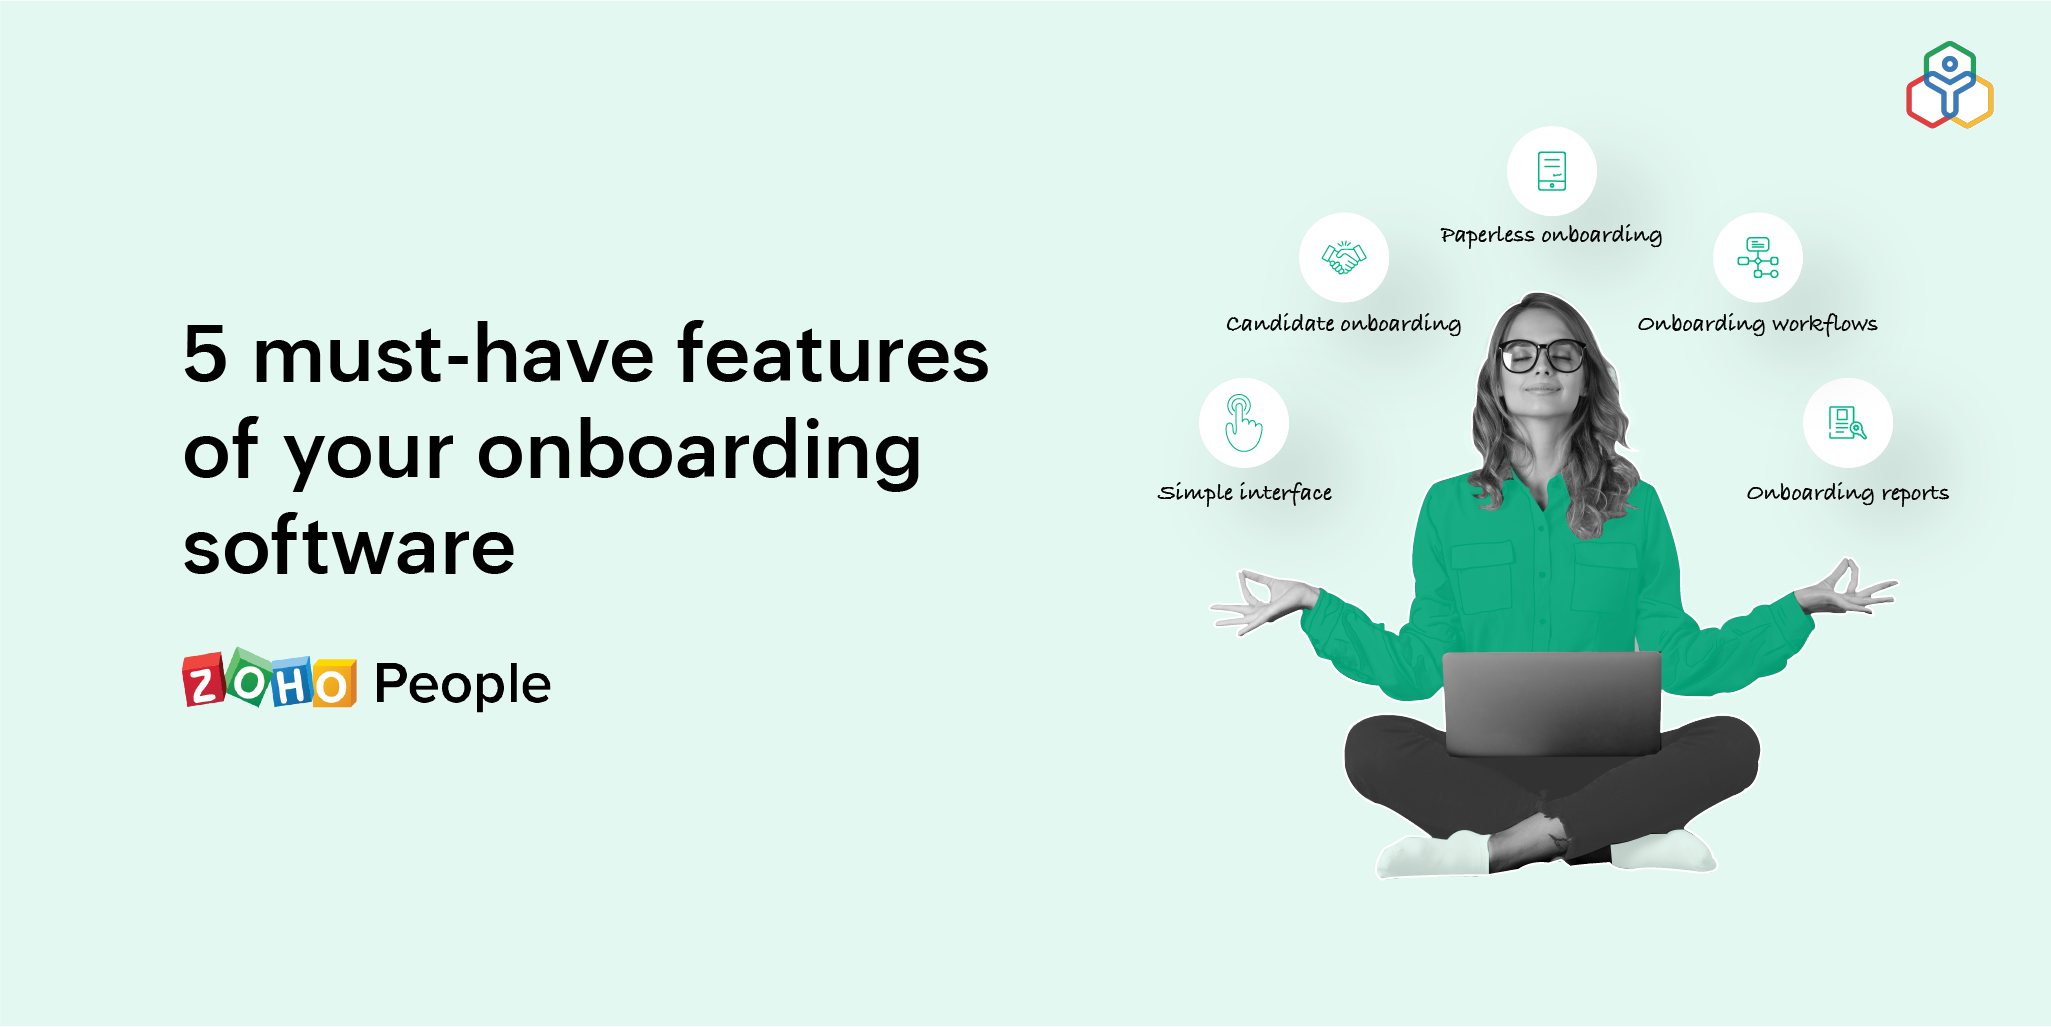 5 features that make an onboarding software comprehensive